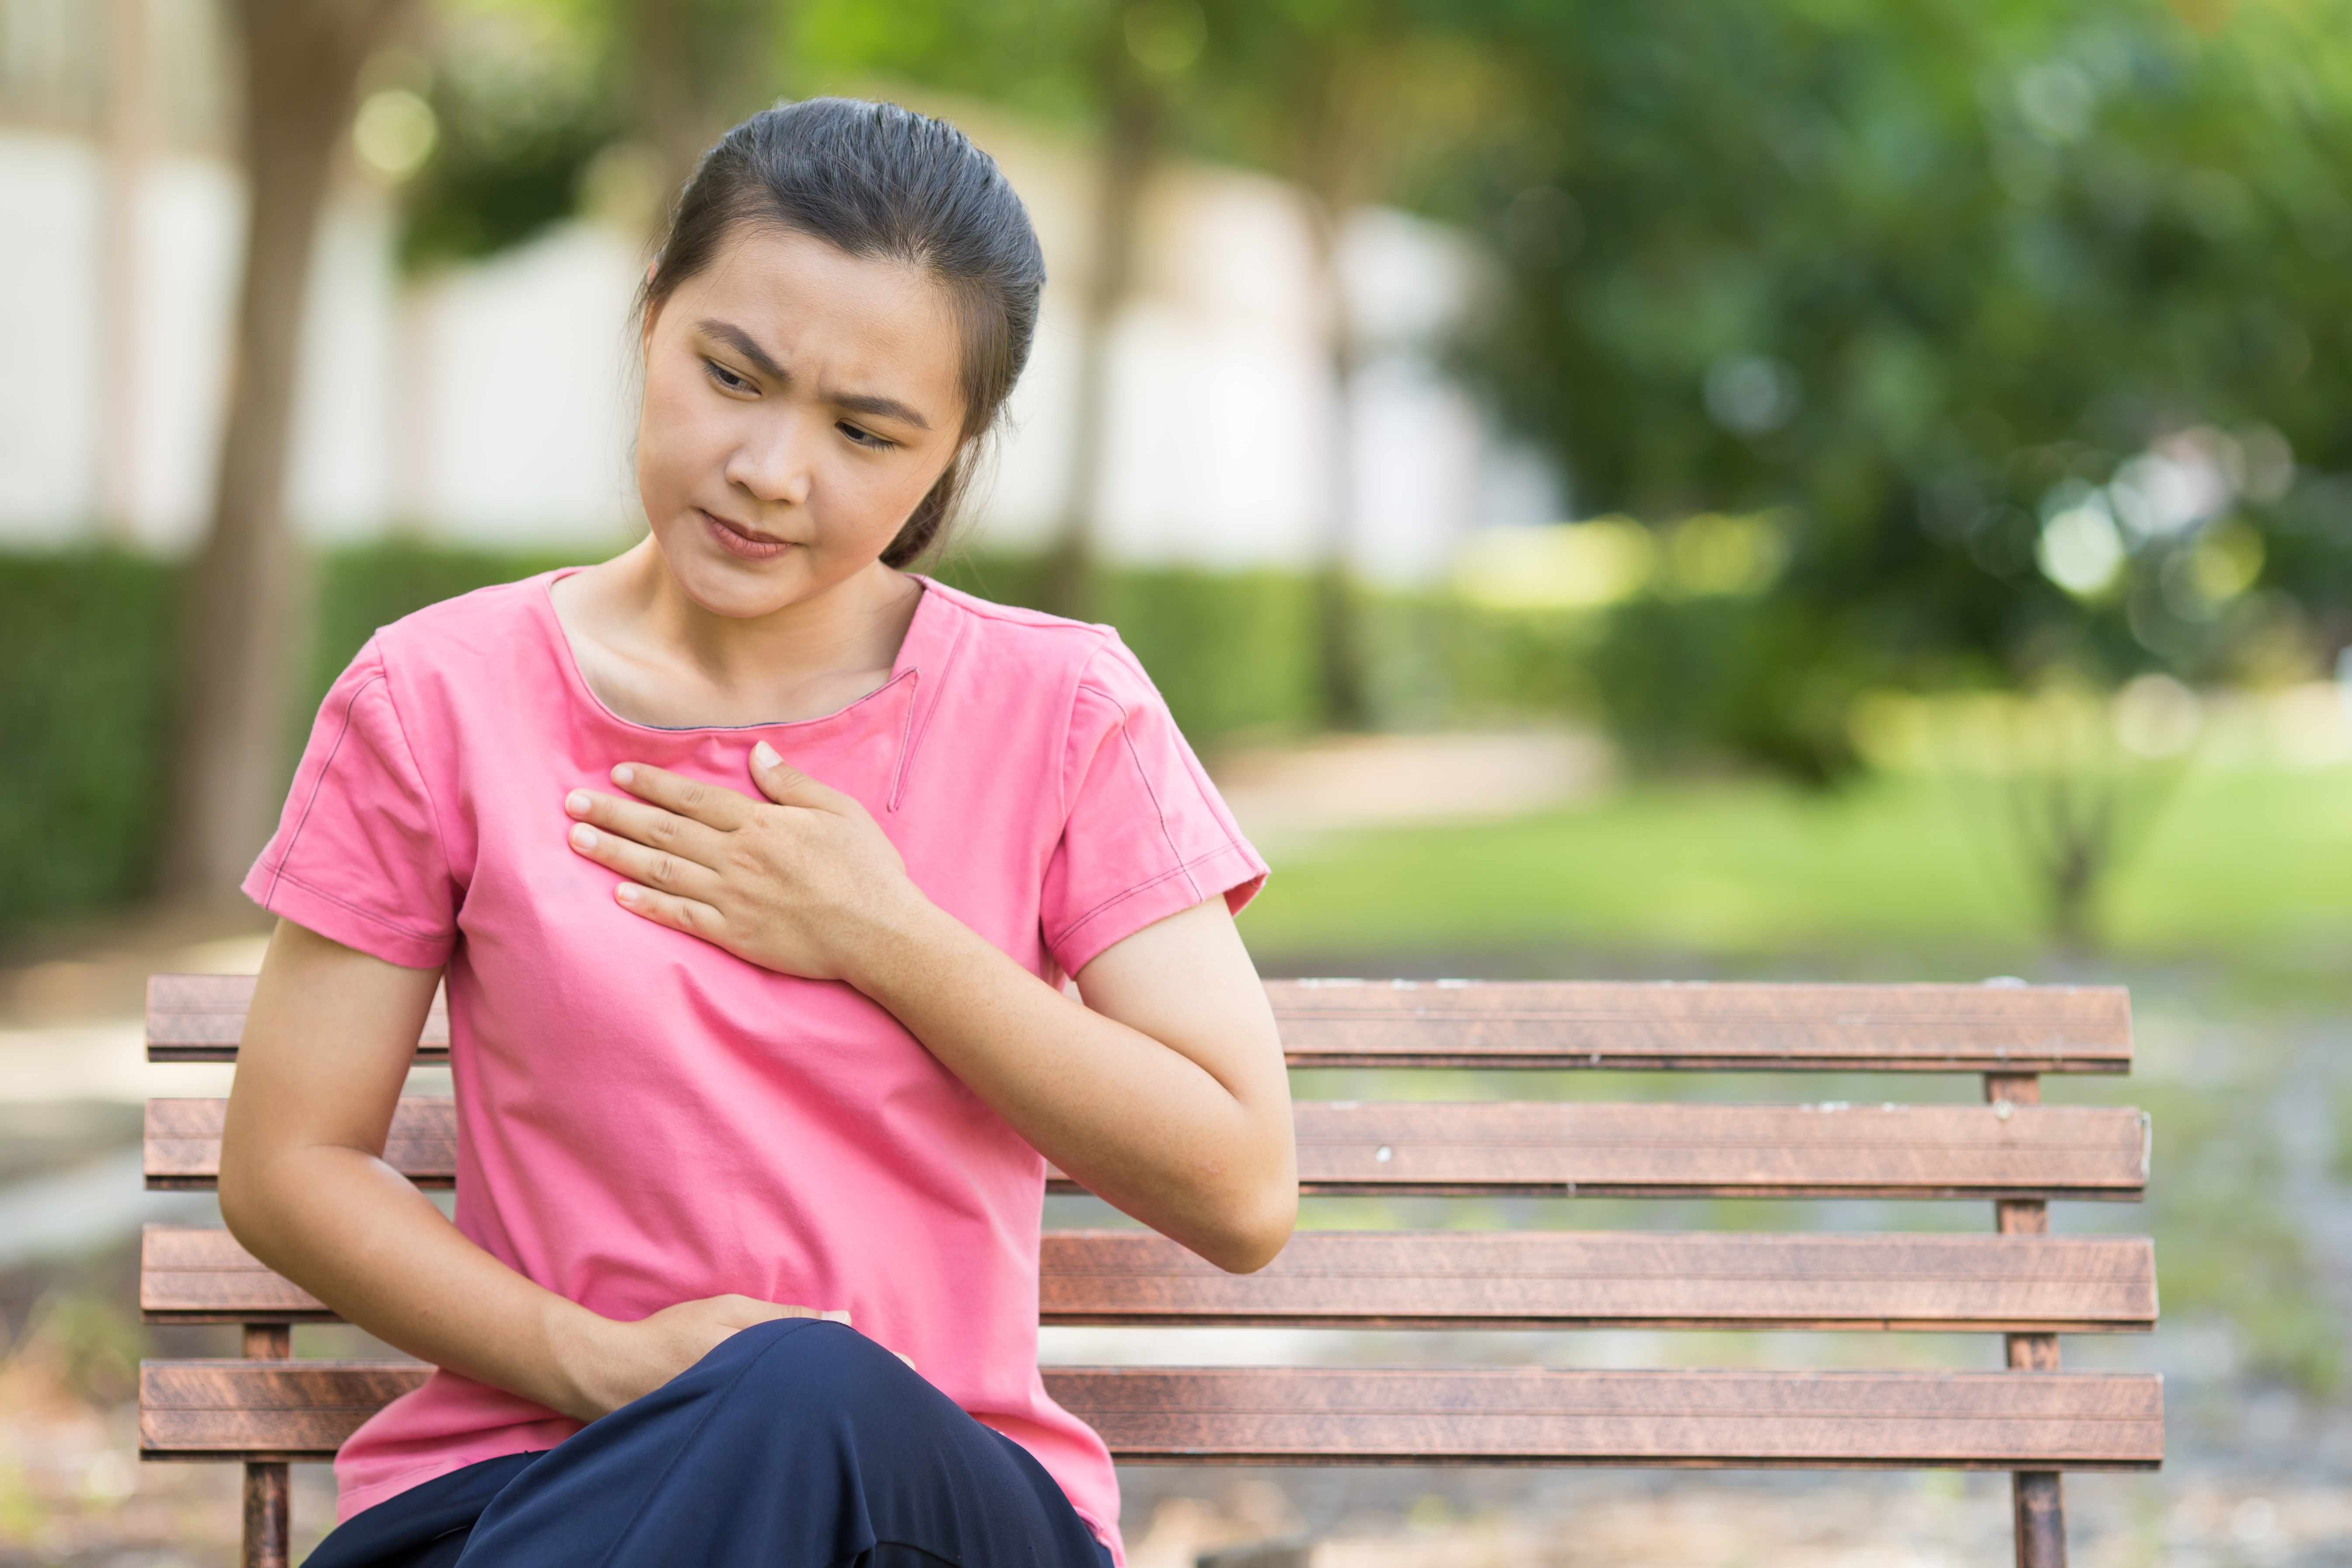 a young woman sitting on a park bench holding her chest because of heartburn or discomfort